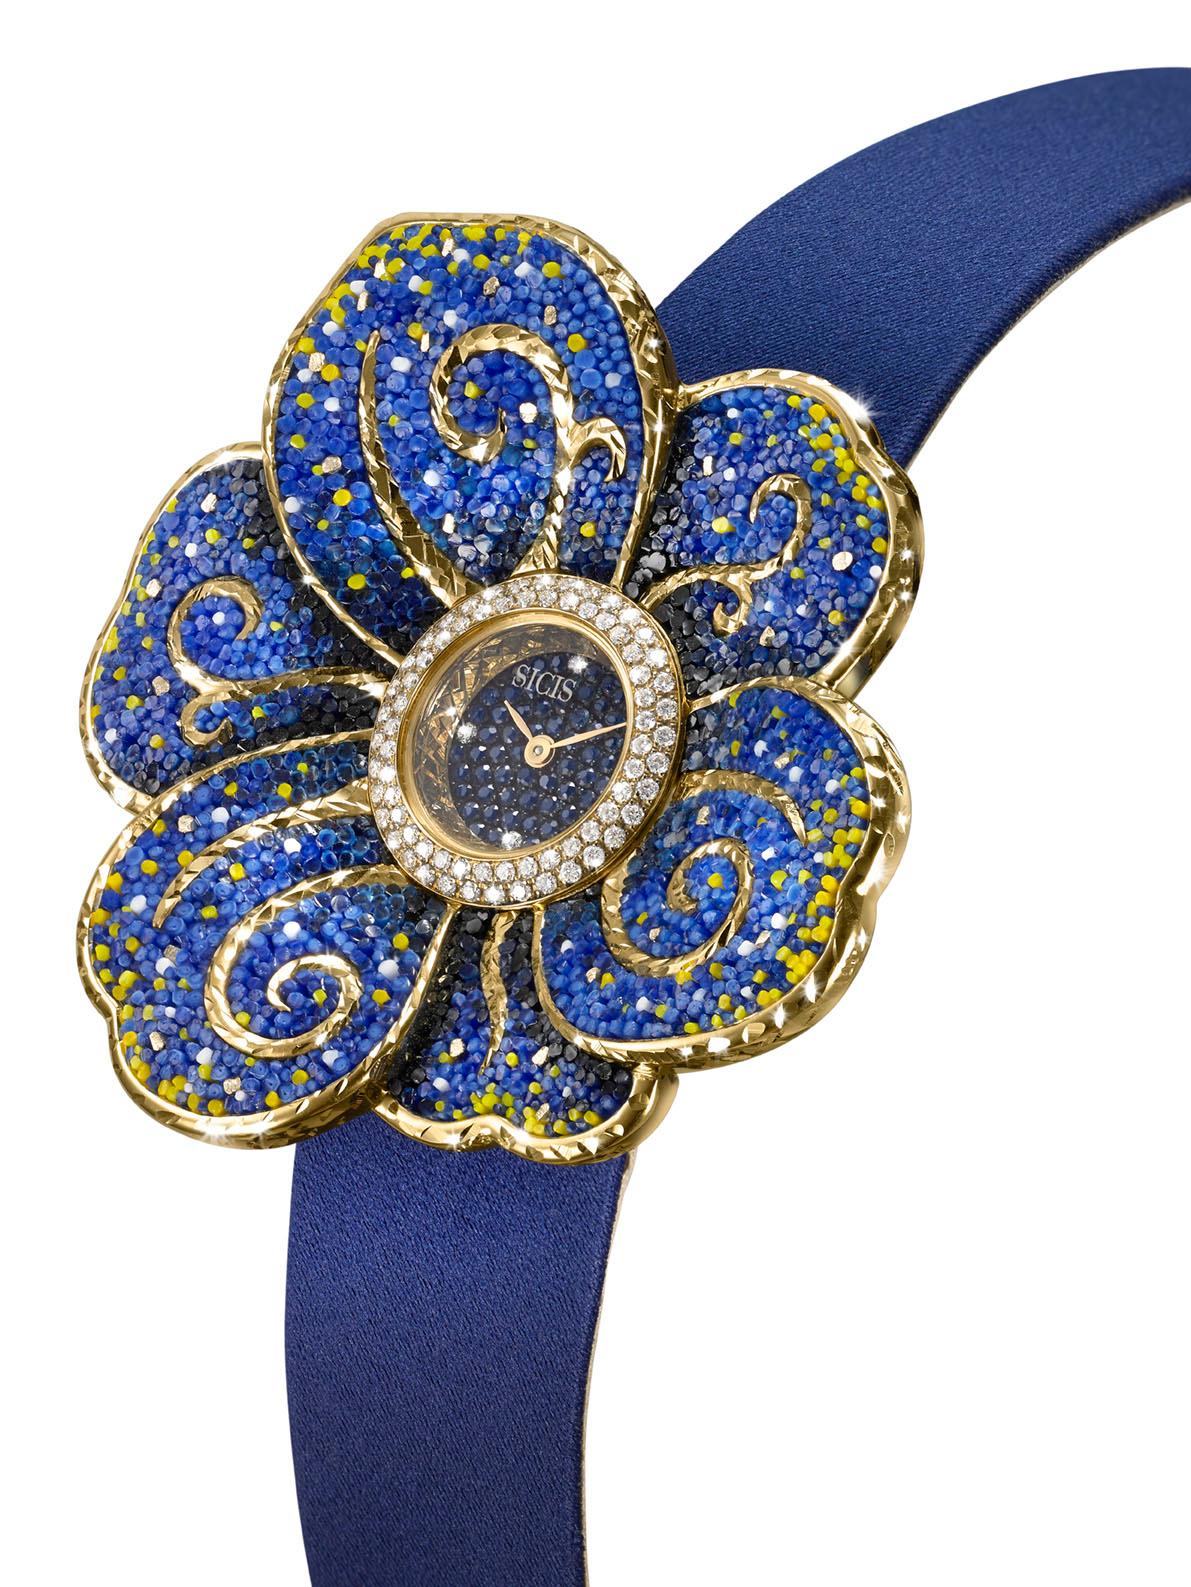 Brilliant Cut Watch Gold White Diamonds Sapphire Satin Strap Hand Decorated with Micro Mosaic For Sale